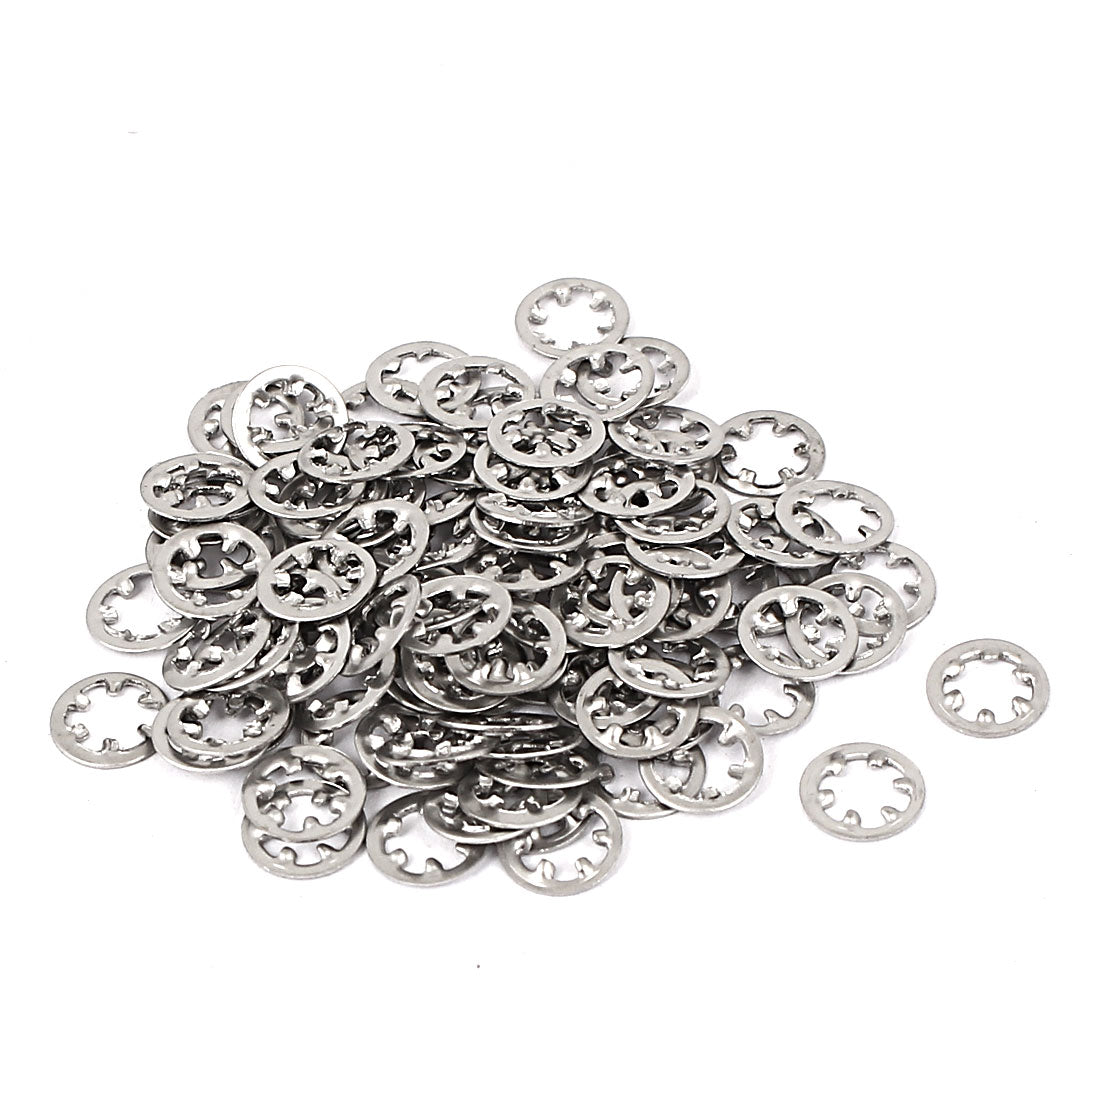 uxcell Uxcell M3 304 Stainless Steel Internal Star Lock Washers 100 Pcs